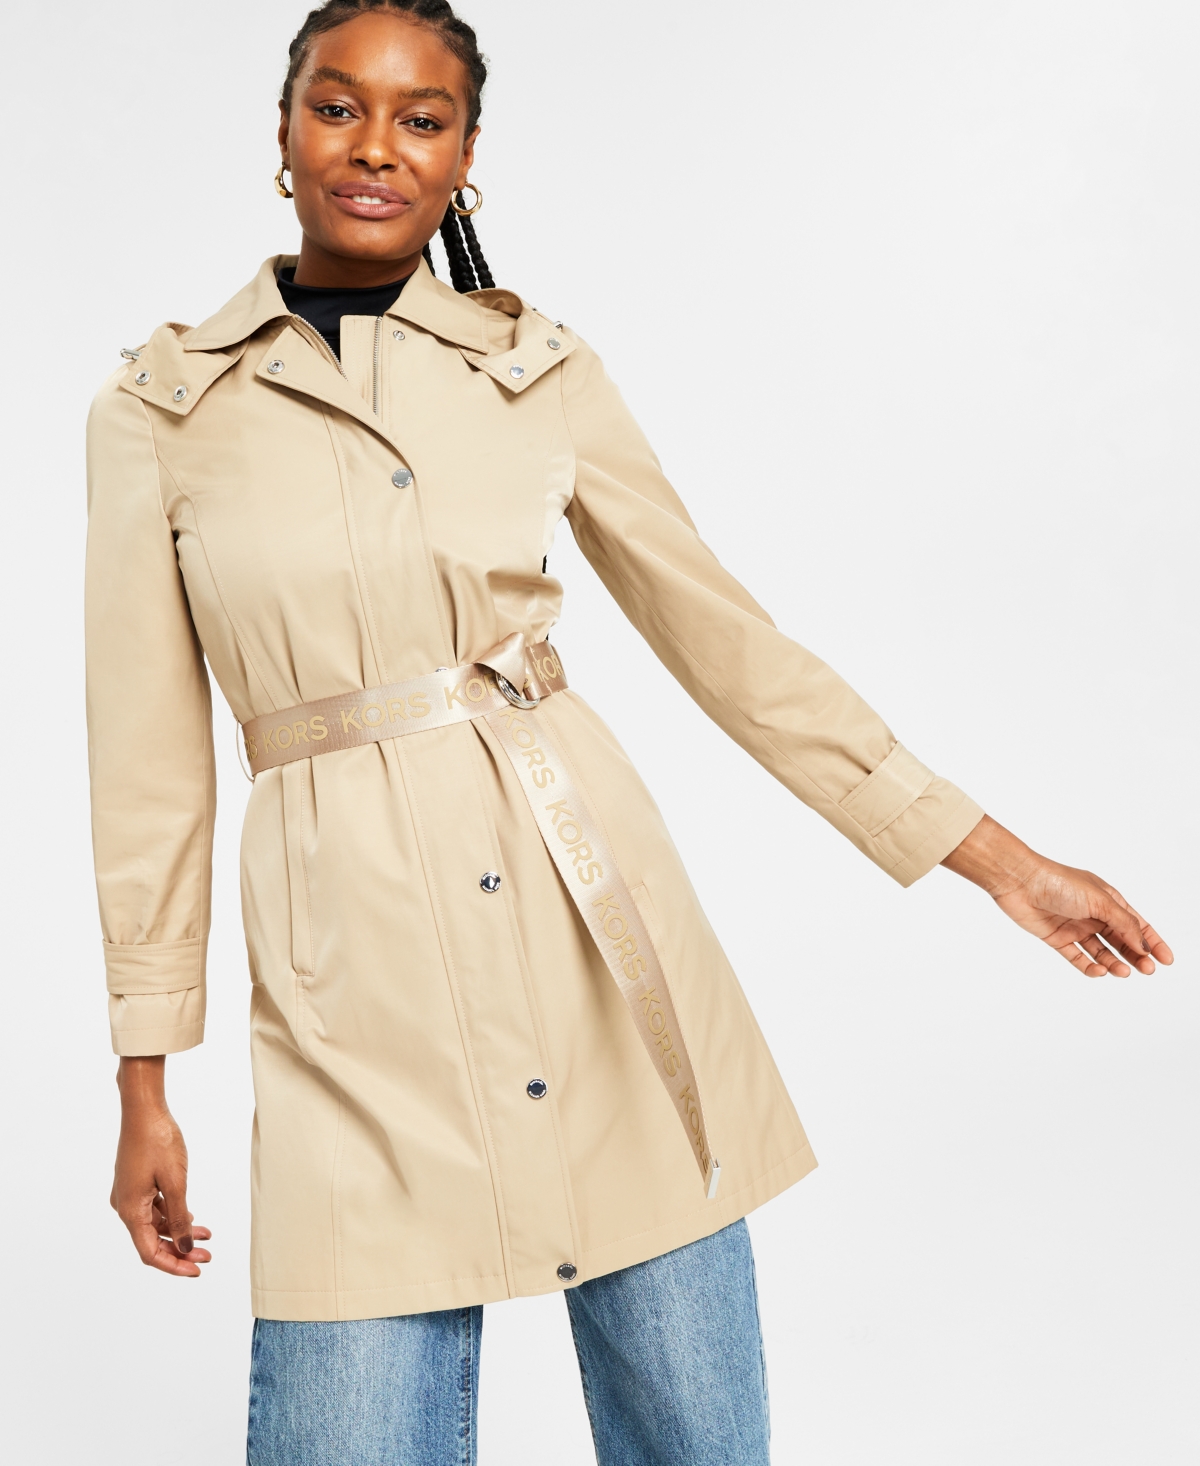 MICHAEL KORS MICHAEL MICHAEL KORS WOMEN'S HOODED BELTED TRENCH COAT, CREATED FOR MACY'S